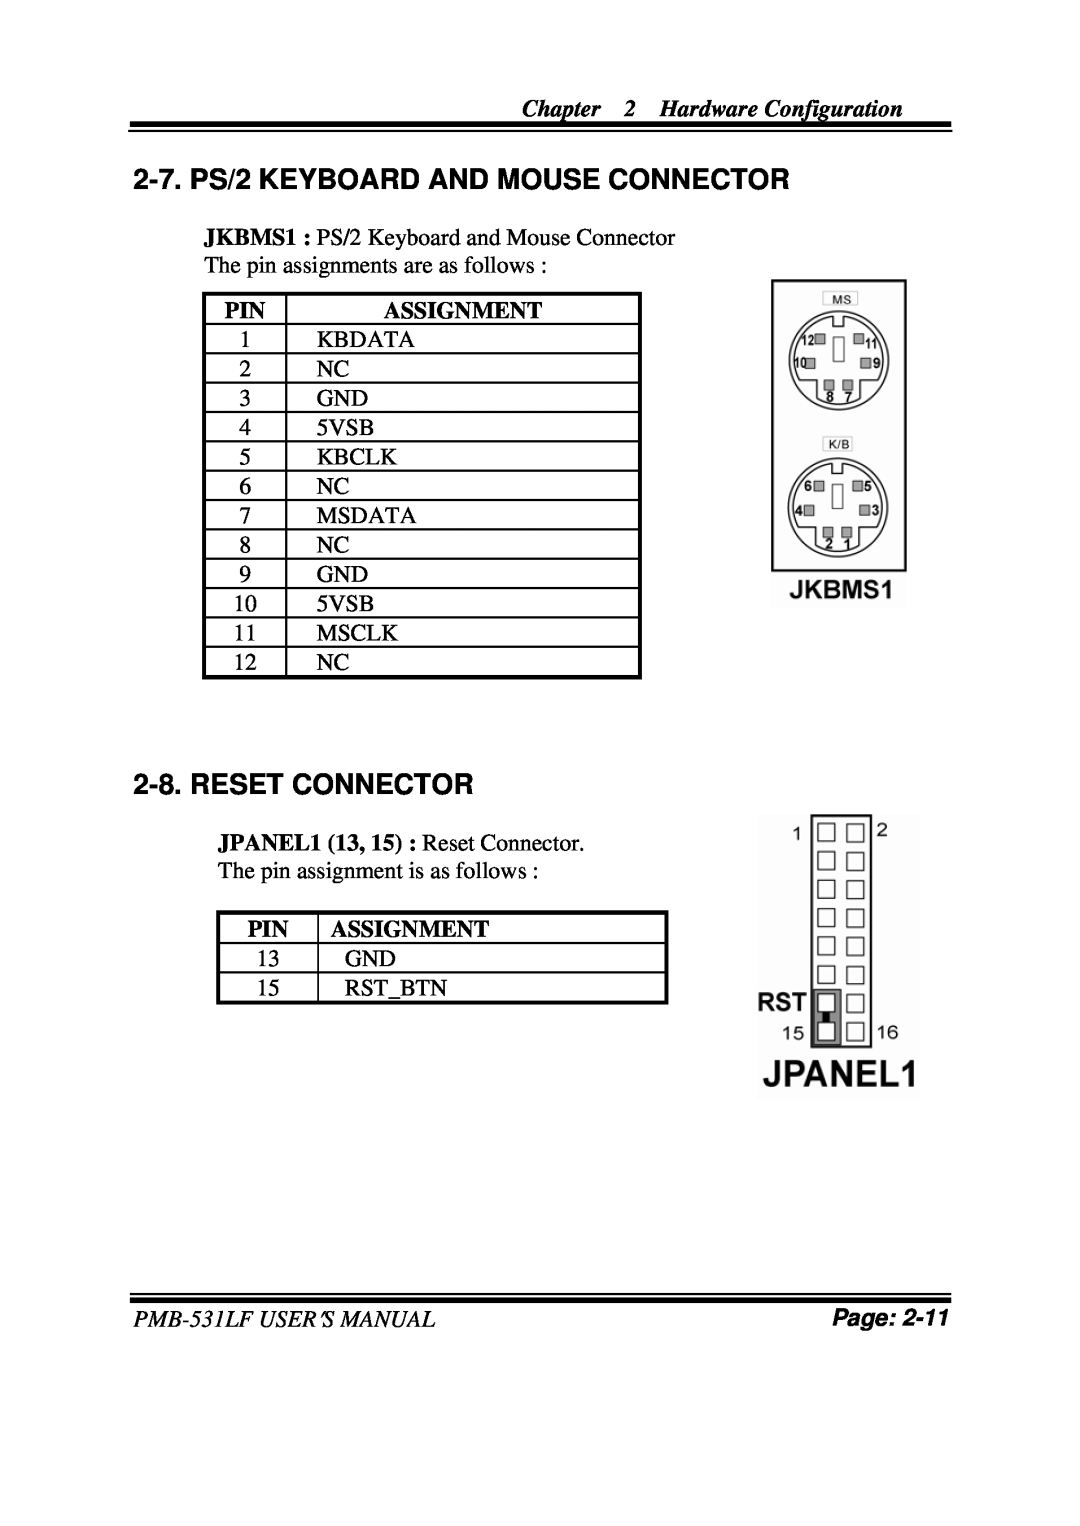 Intel PMB-531LF 2-7.PS/2 KEYBOARD AND MOUSE CONNECTOR, JPANEL1 13, 15 Reset Connector, Hardware Configuration, Page 